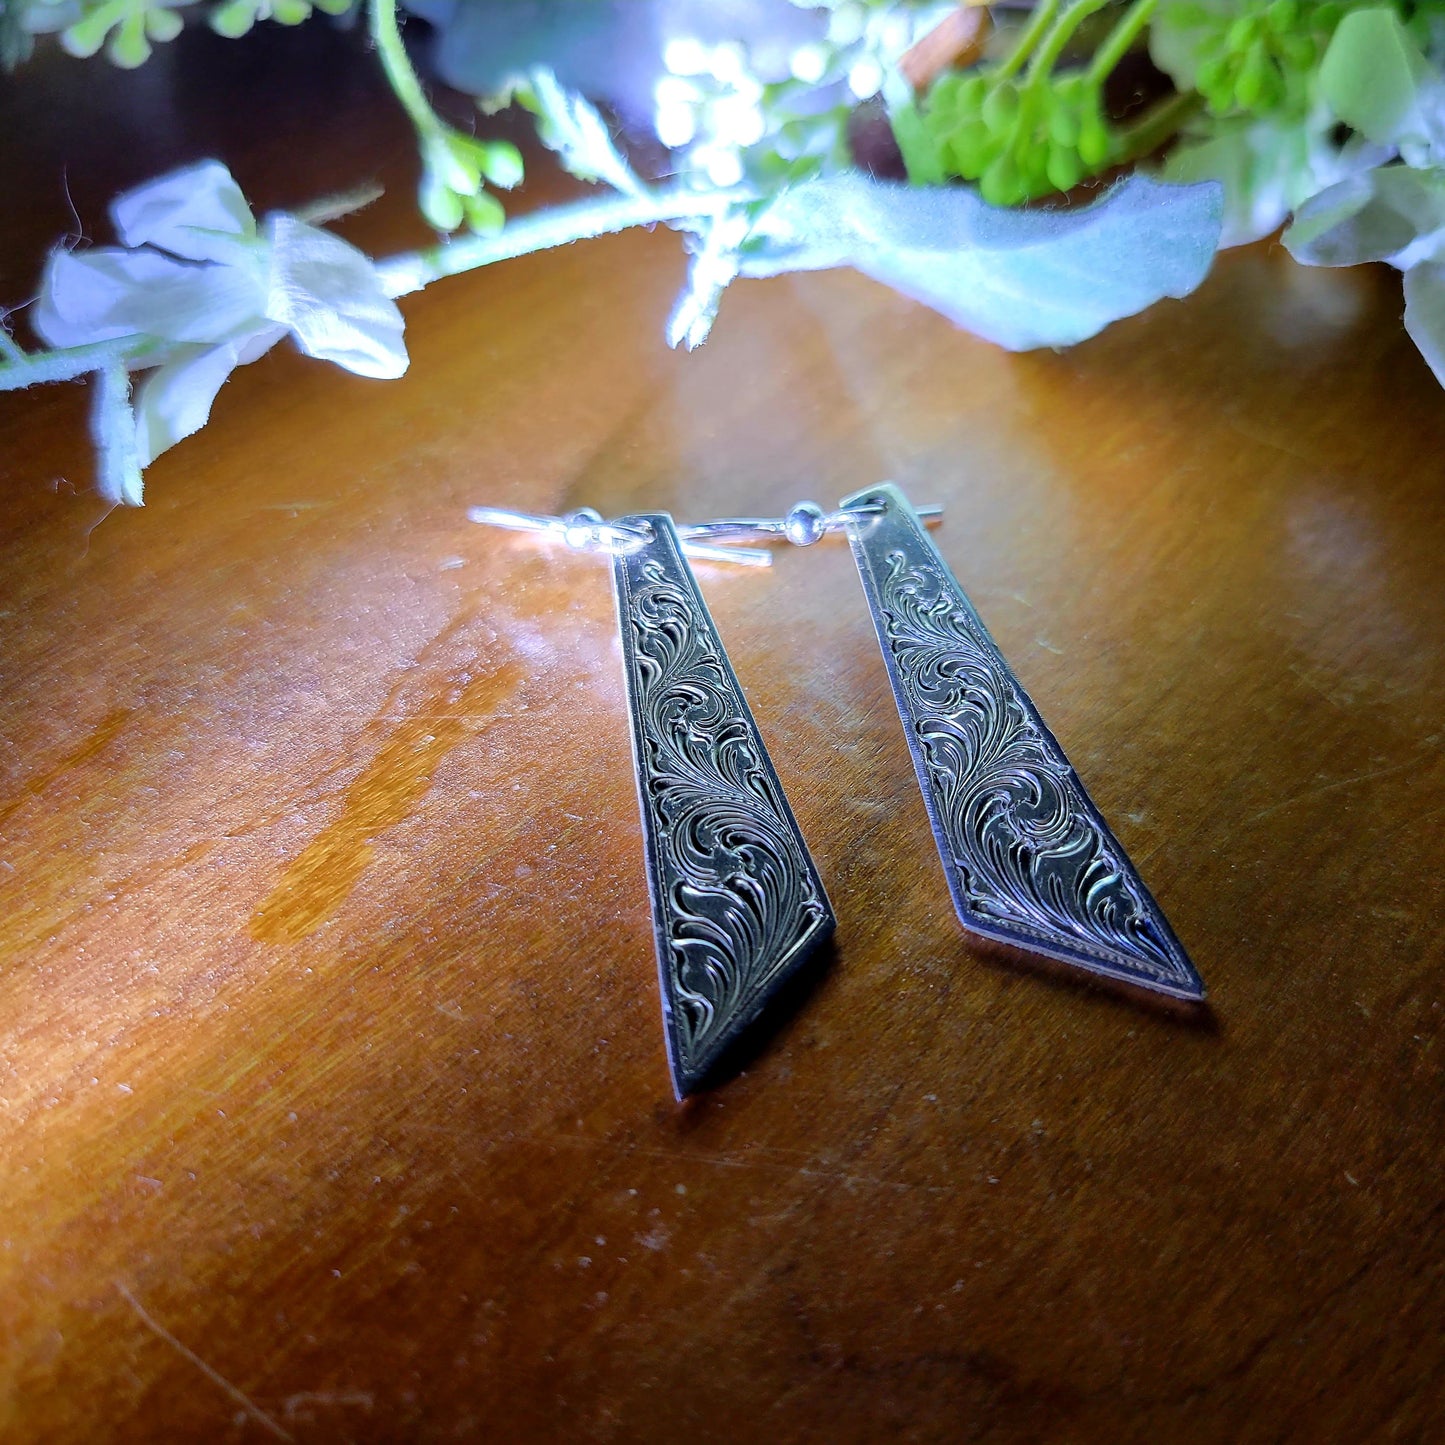 Hand Engraved Western Bridal Jewelry, Sterling Silver Dangle Earrings, Bridal Gift, Wedding Party Jewelry, Gifts for her